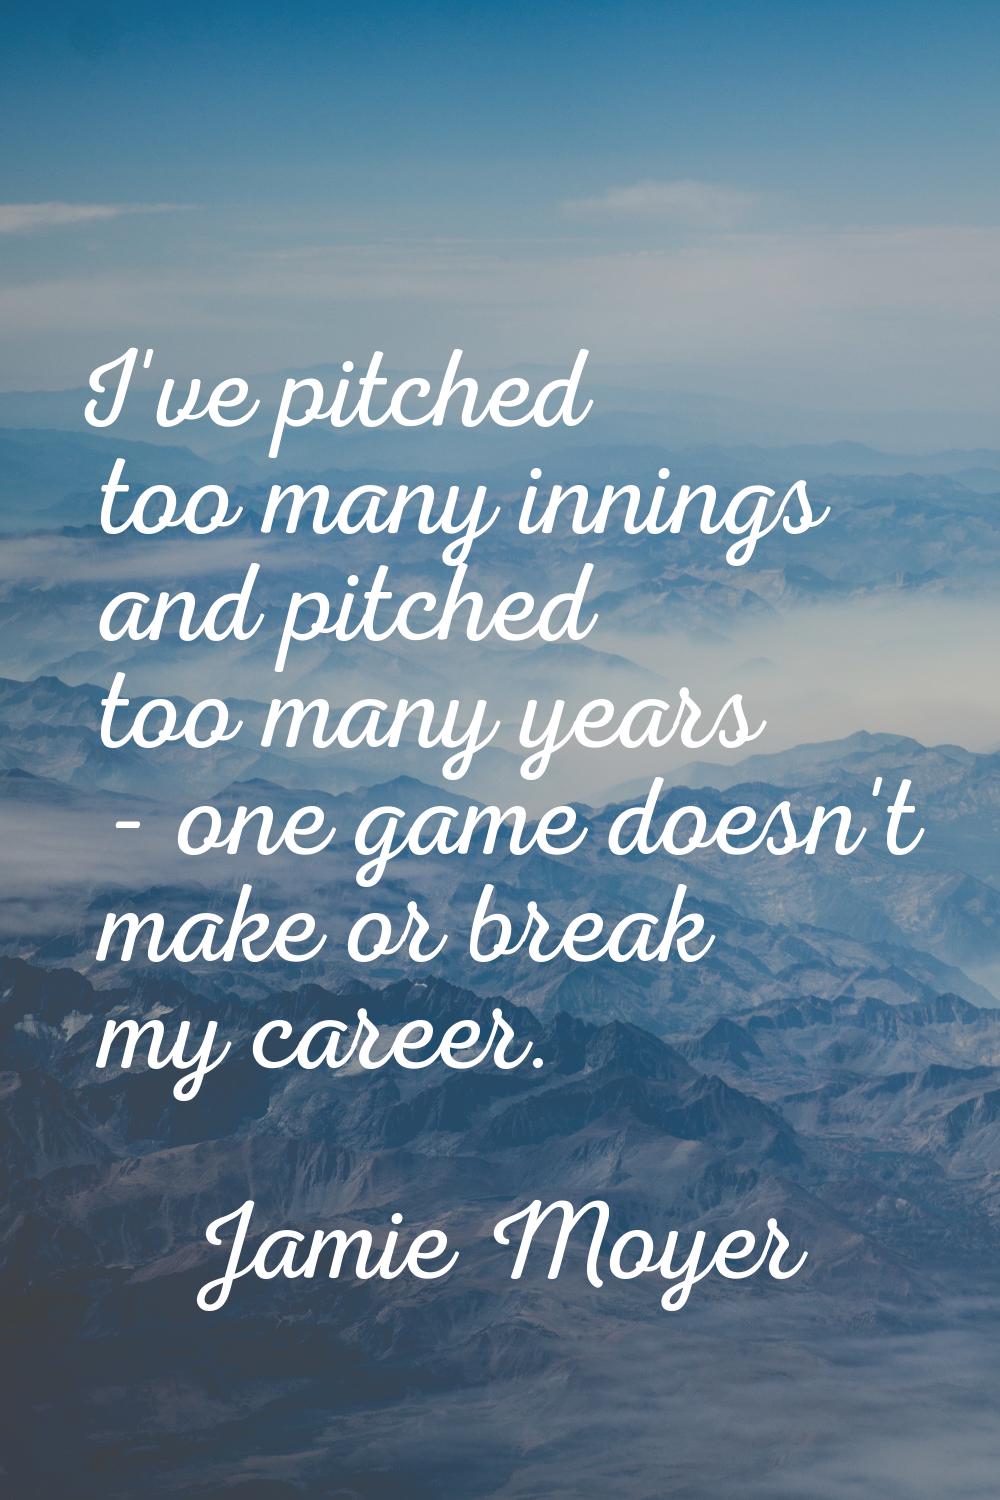 I've pitched too many innings and pitched too many years - one game doesn't make or break my career